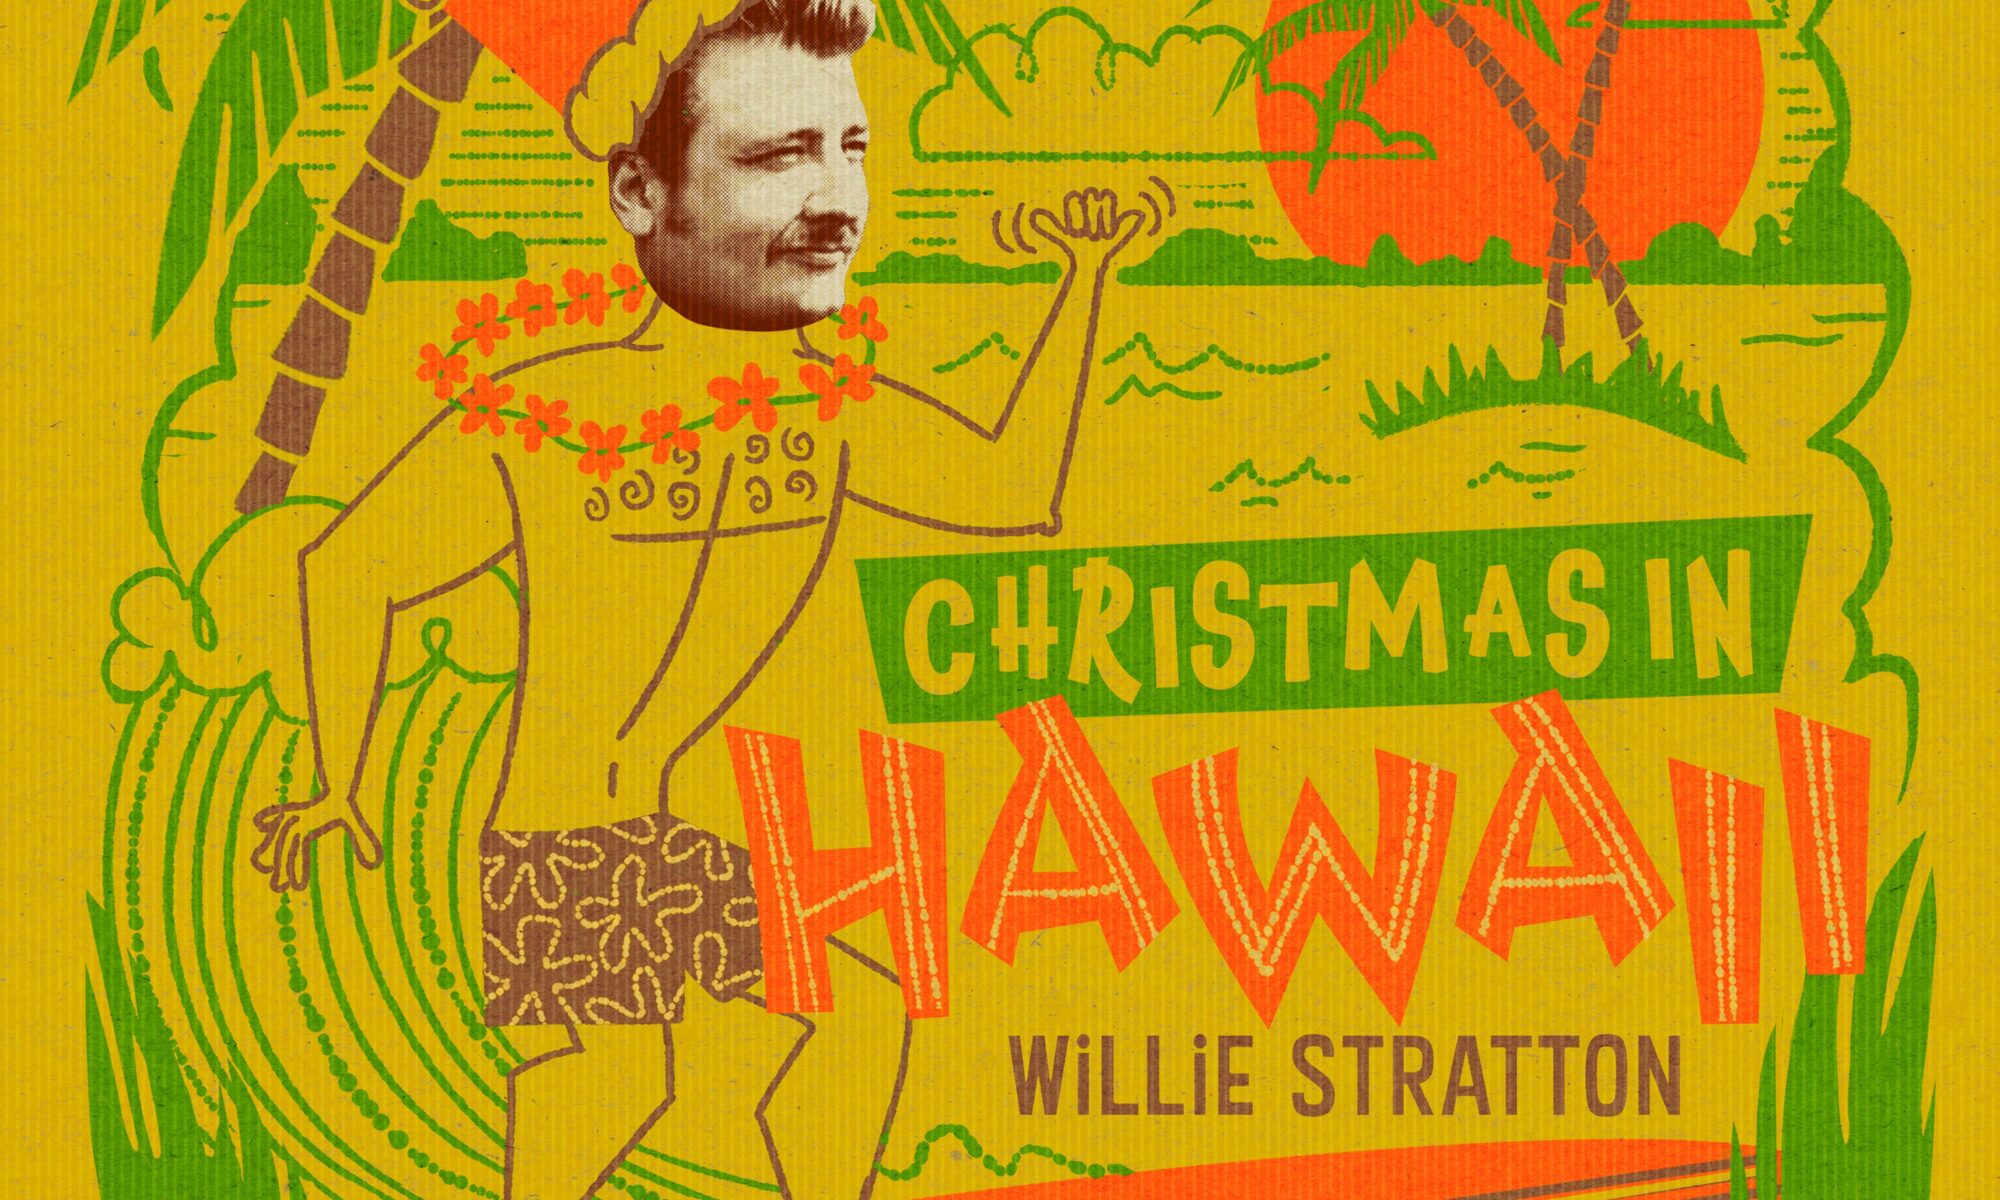 Christmas in Hawaii by Willie Stratton cover of Willie superimposed onto a cartoon of a man in a Christmas hat on a surfboard near palm trees